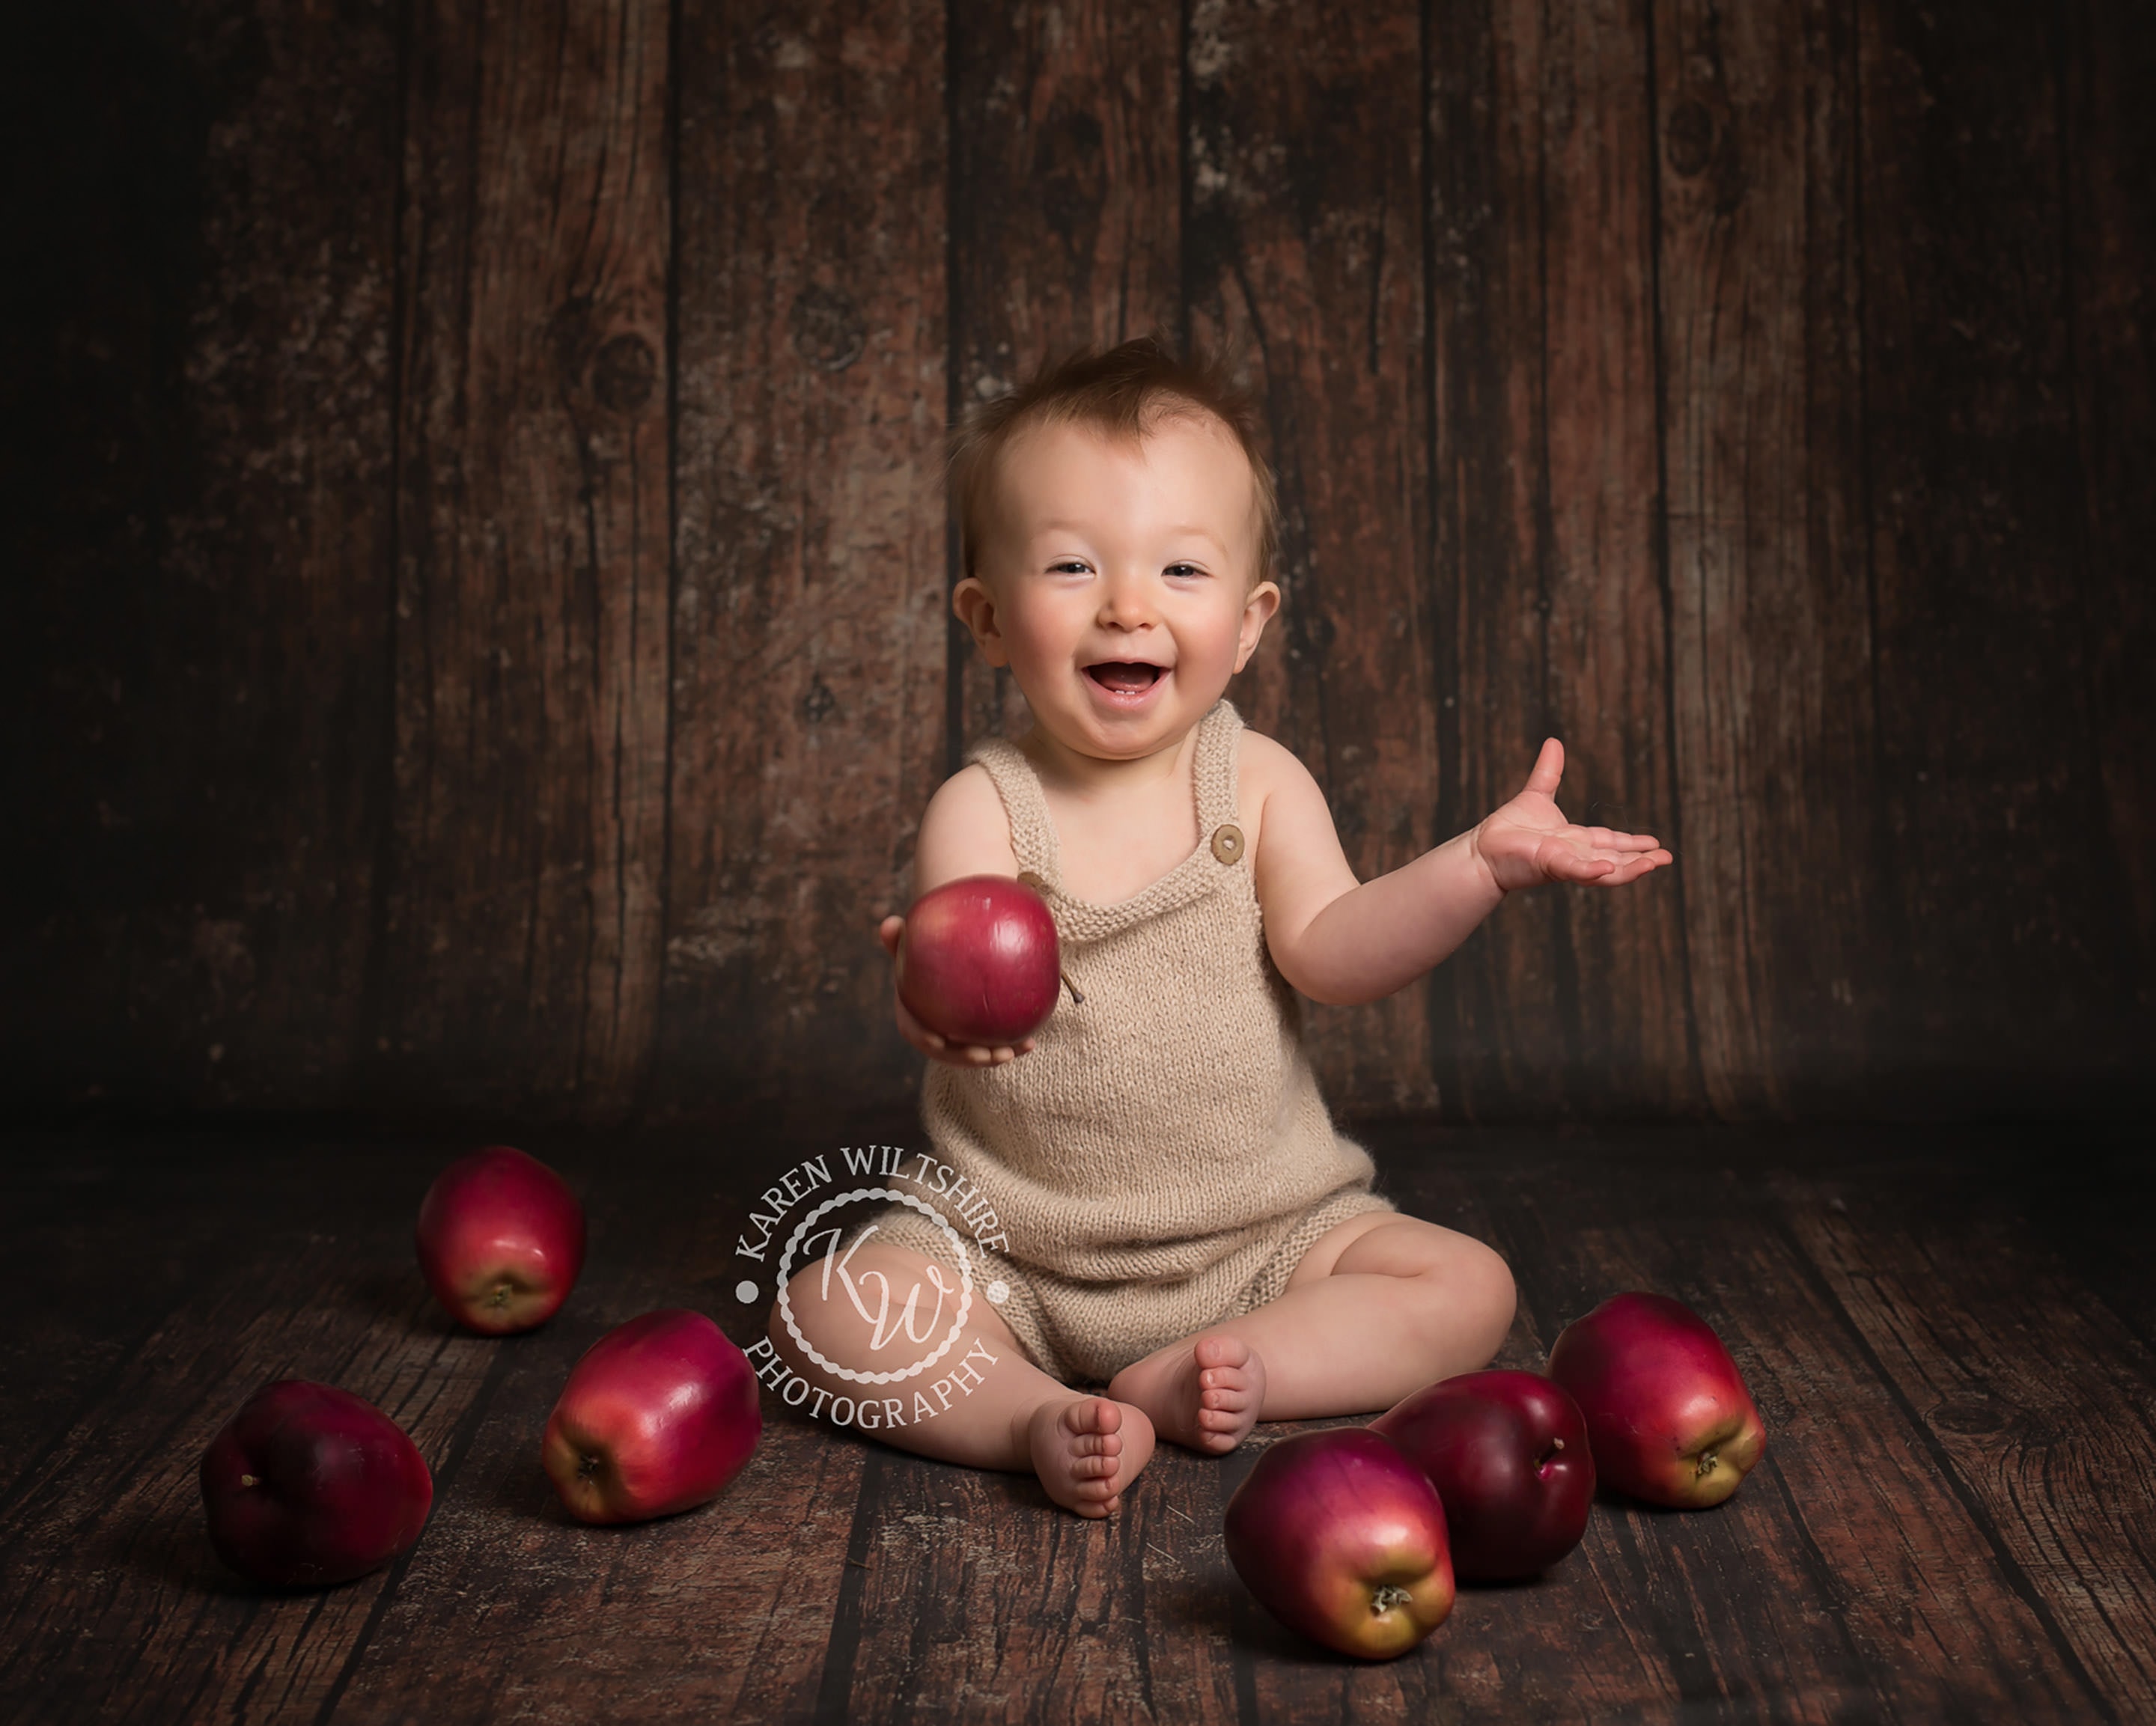 Baby Photographer Bournemouth, baby boy sitting on floor surrounded by apples